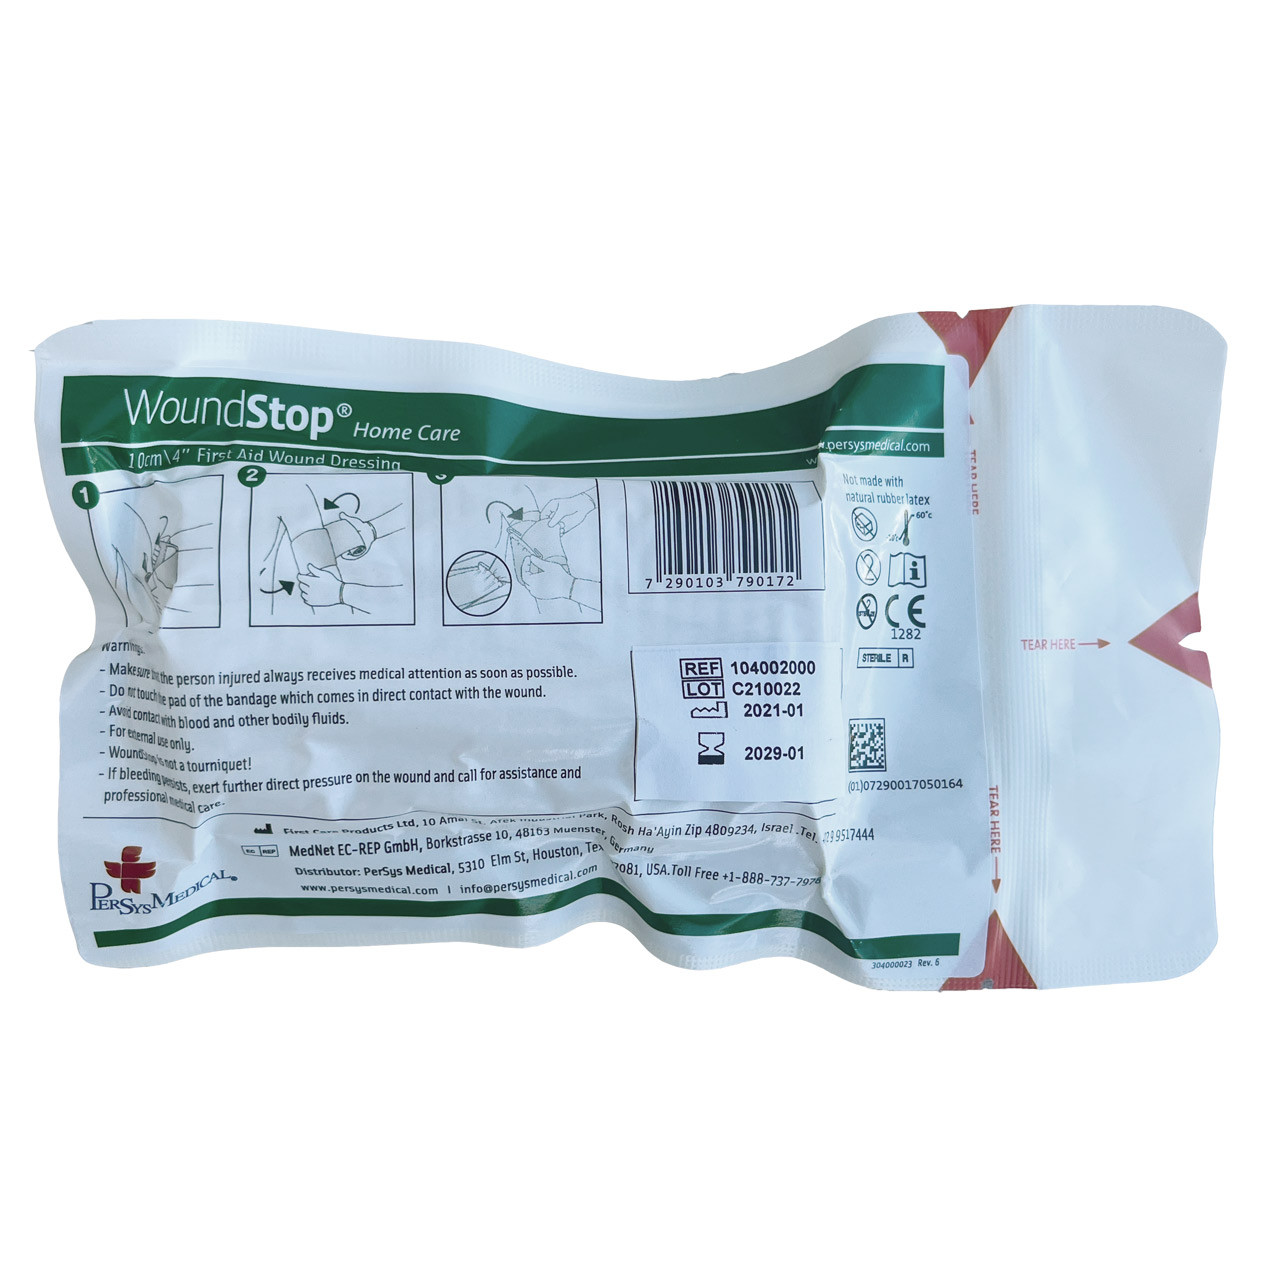 WoundStop Home Care - First Aid Wound Dressing